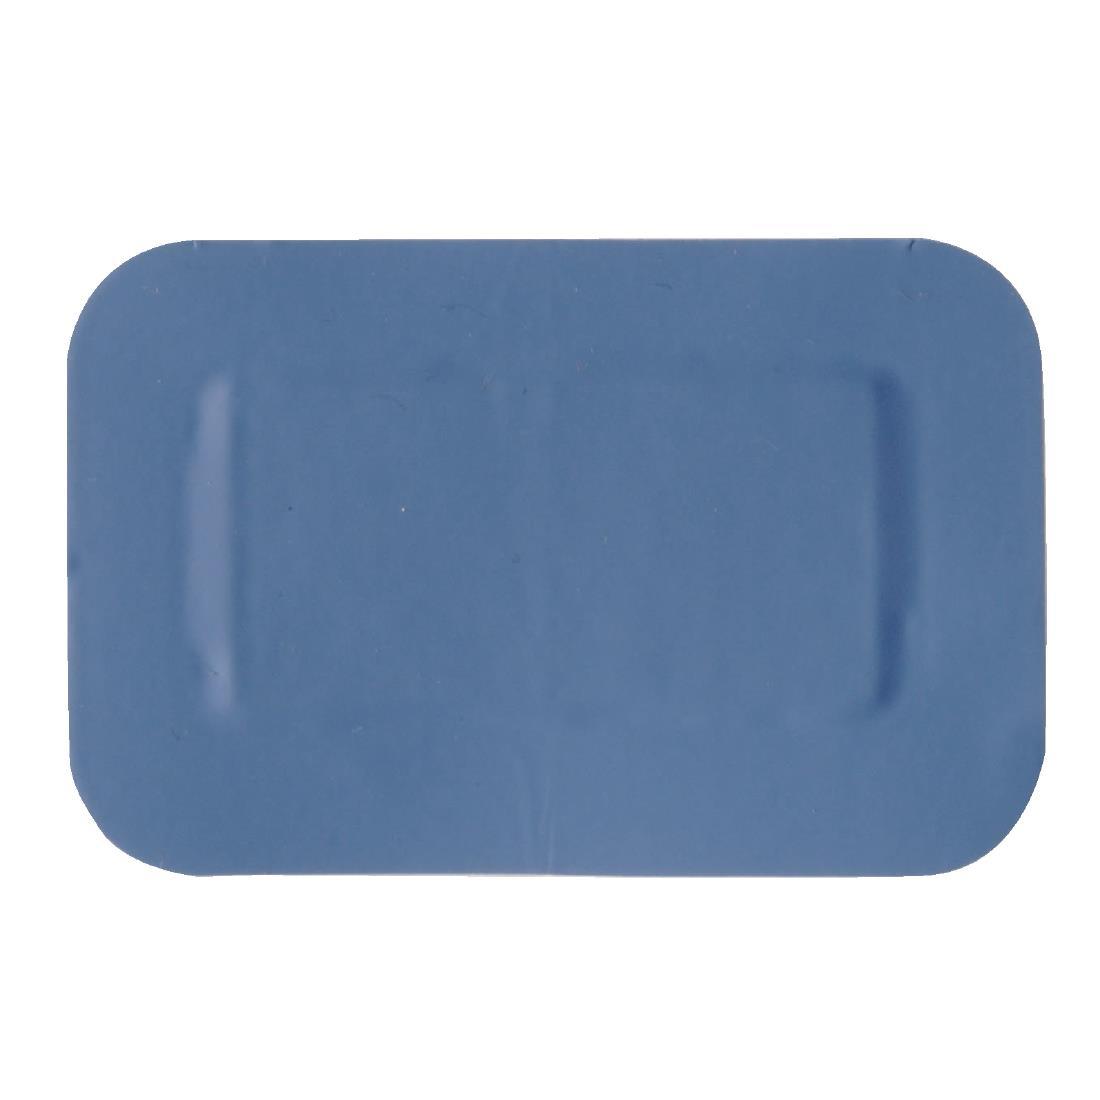 A-CARE DETECTABLE BLUE PLASTERS LARGE PATCH 75X50MM - BOX 50 - CB443  - 1